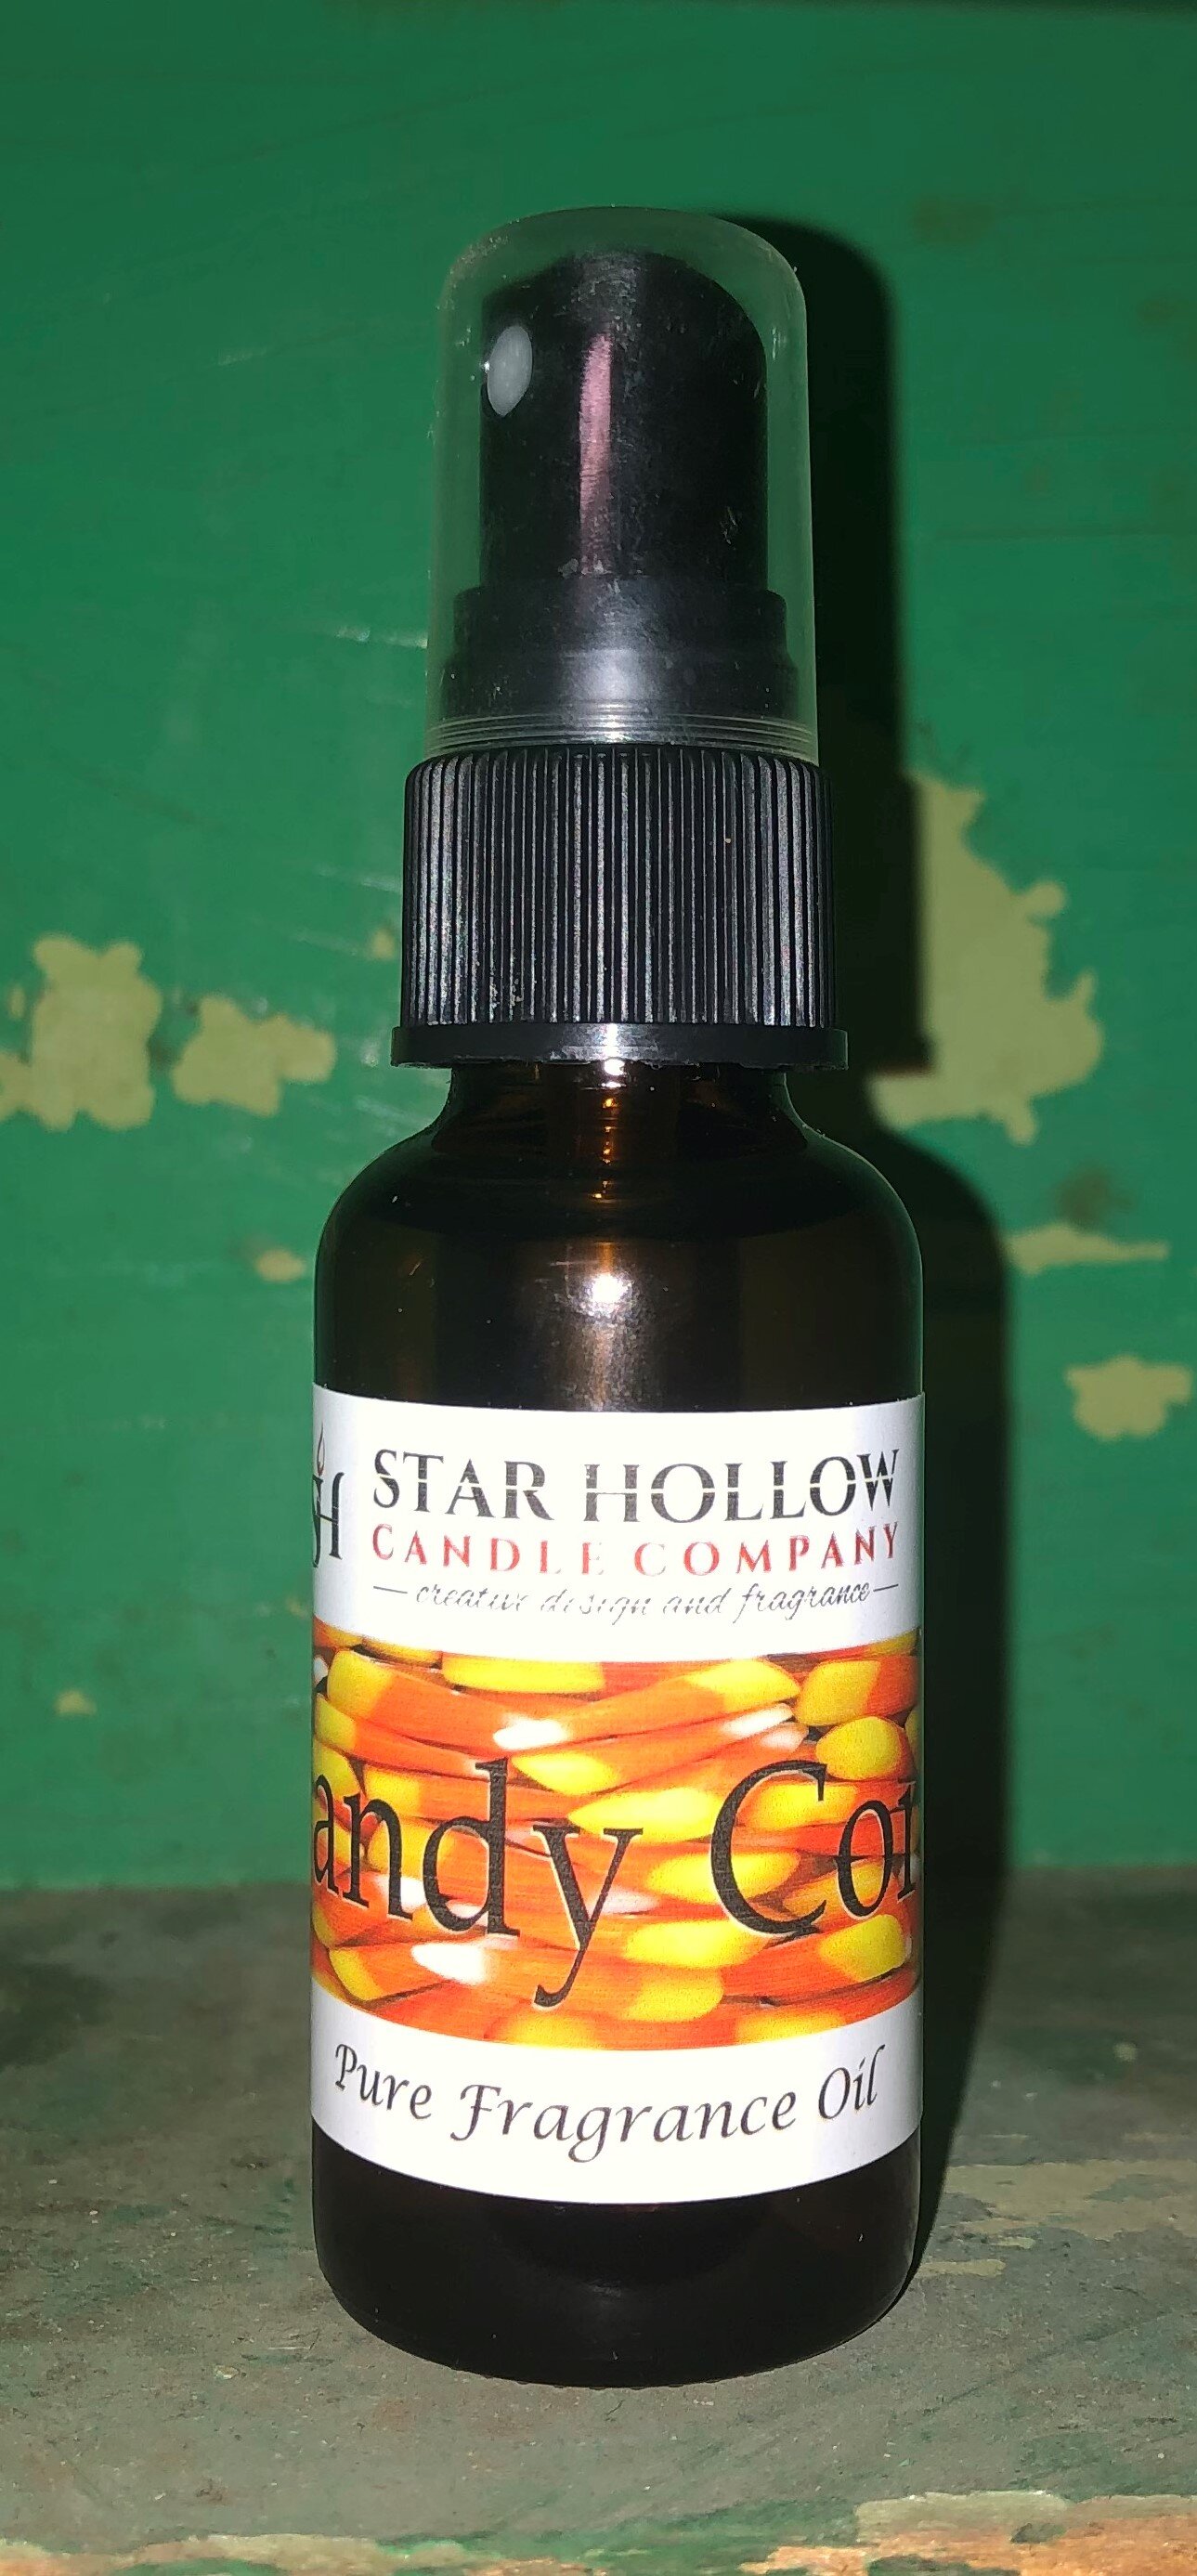 Star Hollow Candle Company Candy Corn Fragrance Oil